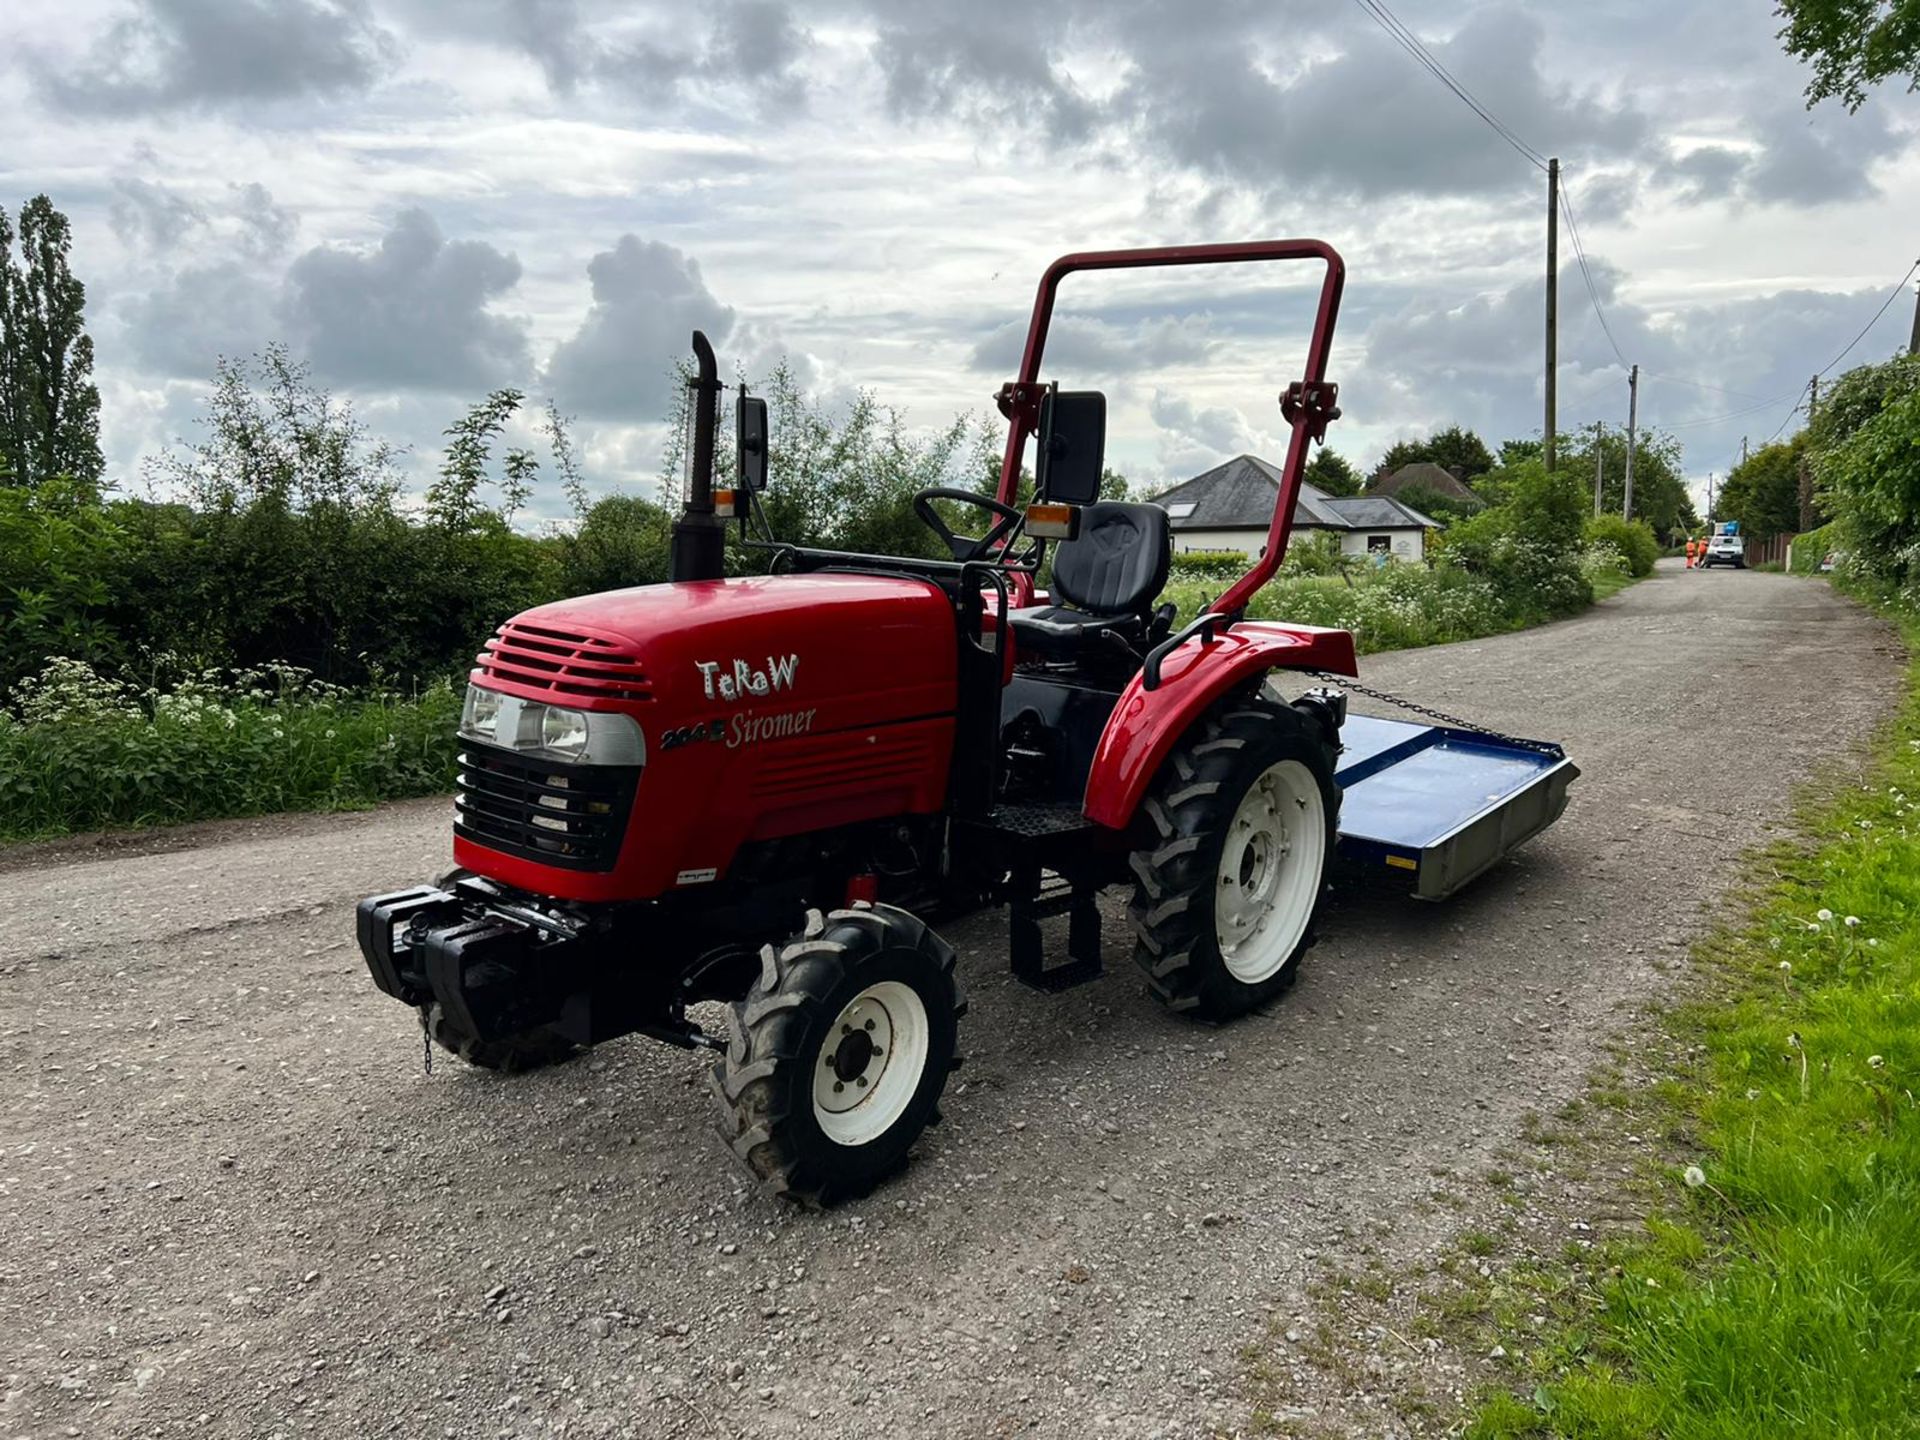 Siromer 204E 20HP 4WD Compact Tractor With 5FT Beaco Grass Topper - 68 Plate "PLUS VAT" - Image 2 of 21